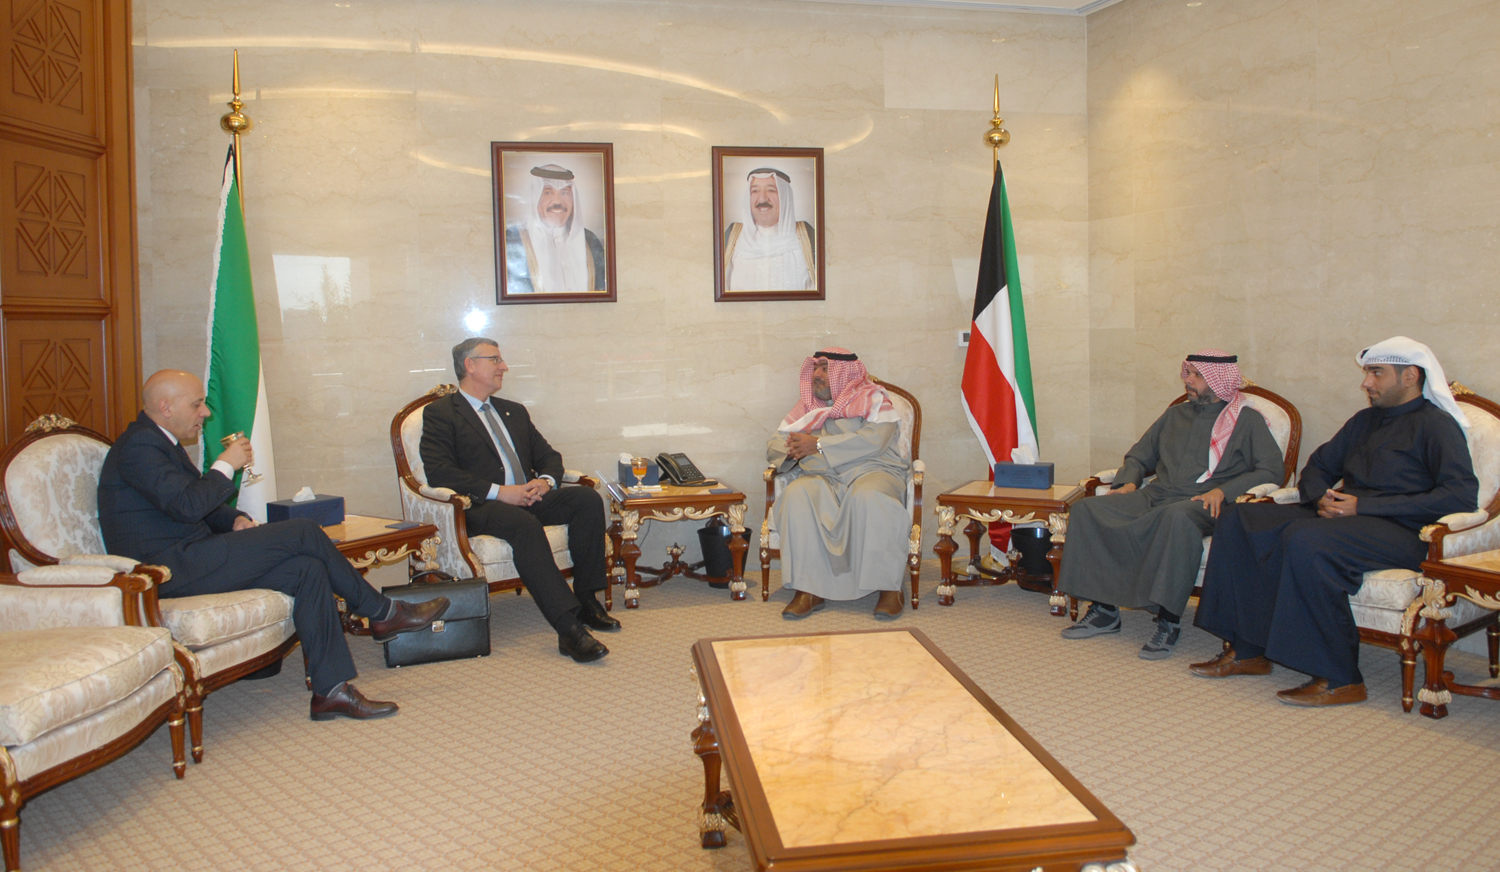 Chief of Kuwait's National Security Bureau Sheikh Thamer Ali Al-Sabah meets with the Dean of the NATO Defense College and retired Brigadier General Frantisek Micanek